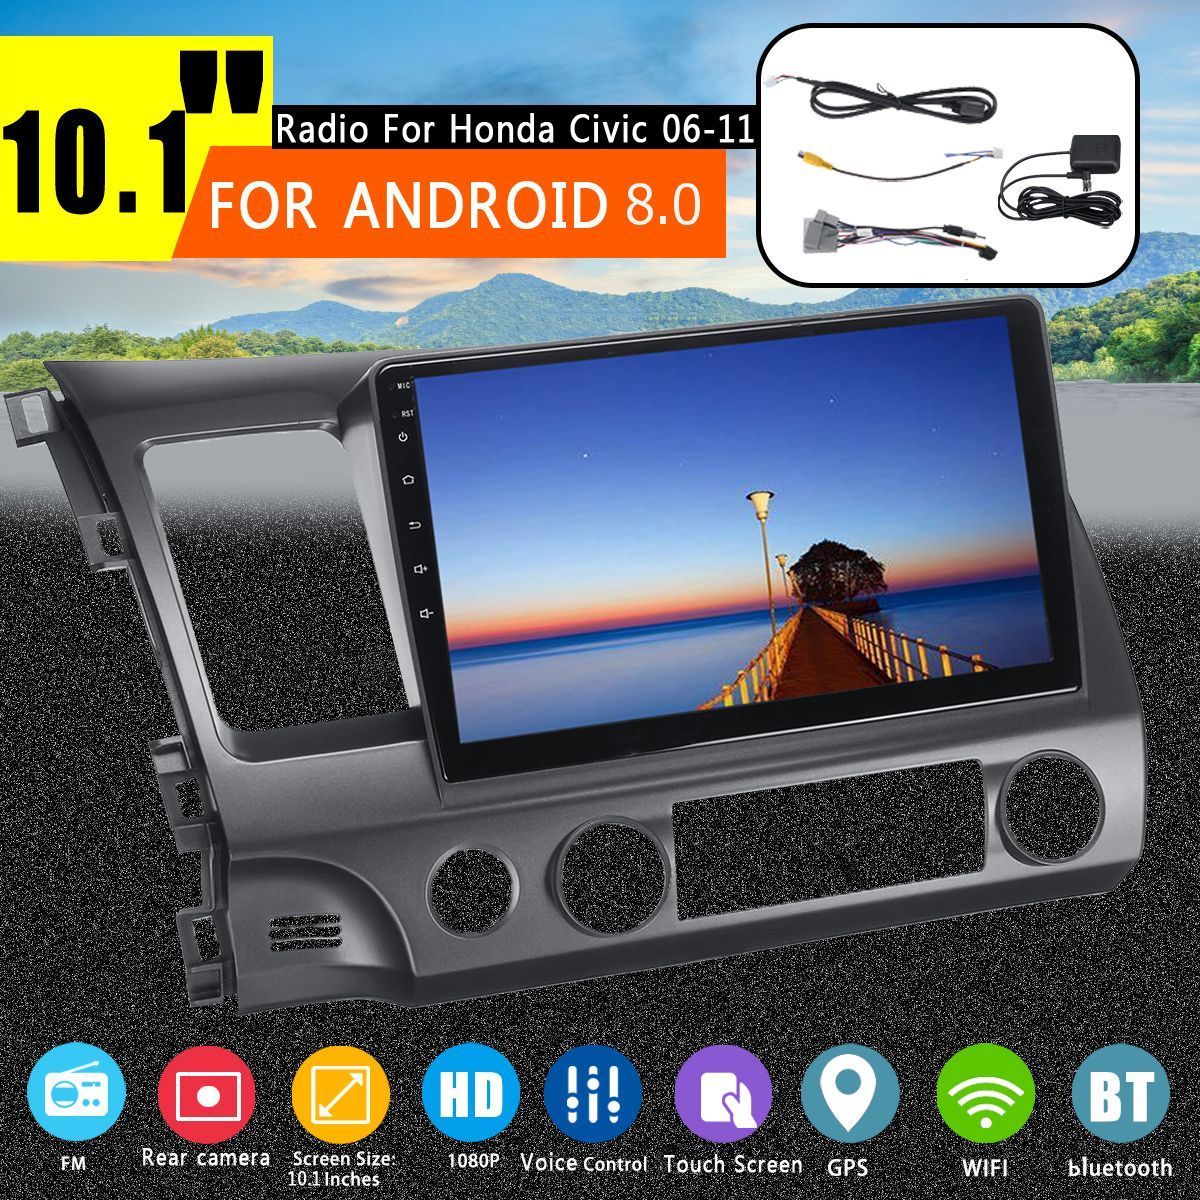 YUEHOO-101-Inch-for-Android-80-Car-MP5-Player-232G-Stereo-Radio-GPS-WIFI-4G-bluetooth-FM-AM-RDS-for--1565006